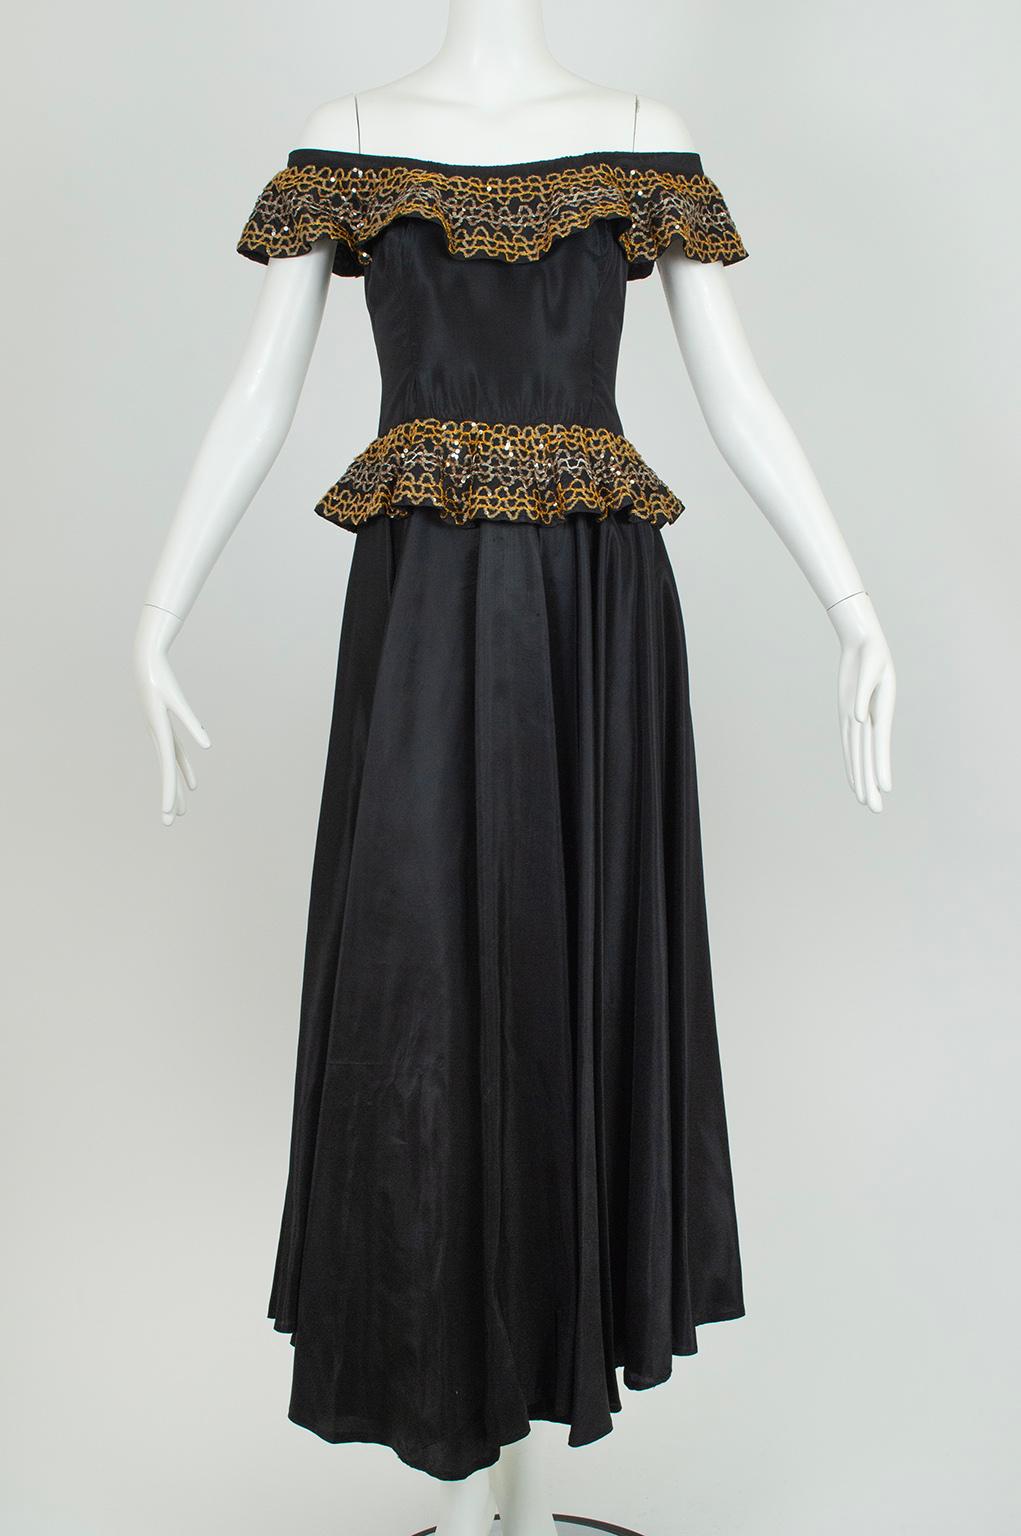 Worn on the shoulder this gown is the epitome of 1940s innocence, but off shoulder it suggests an Andalusian flamenco dress thanks to its 22 ½ foot skirt and sequined ruffles. Accessorize with castanets and Paco de Lucia.

Off-shoulder taffeta ball